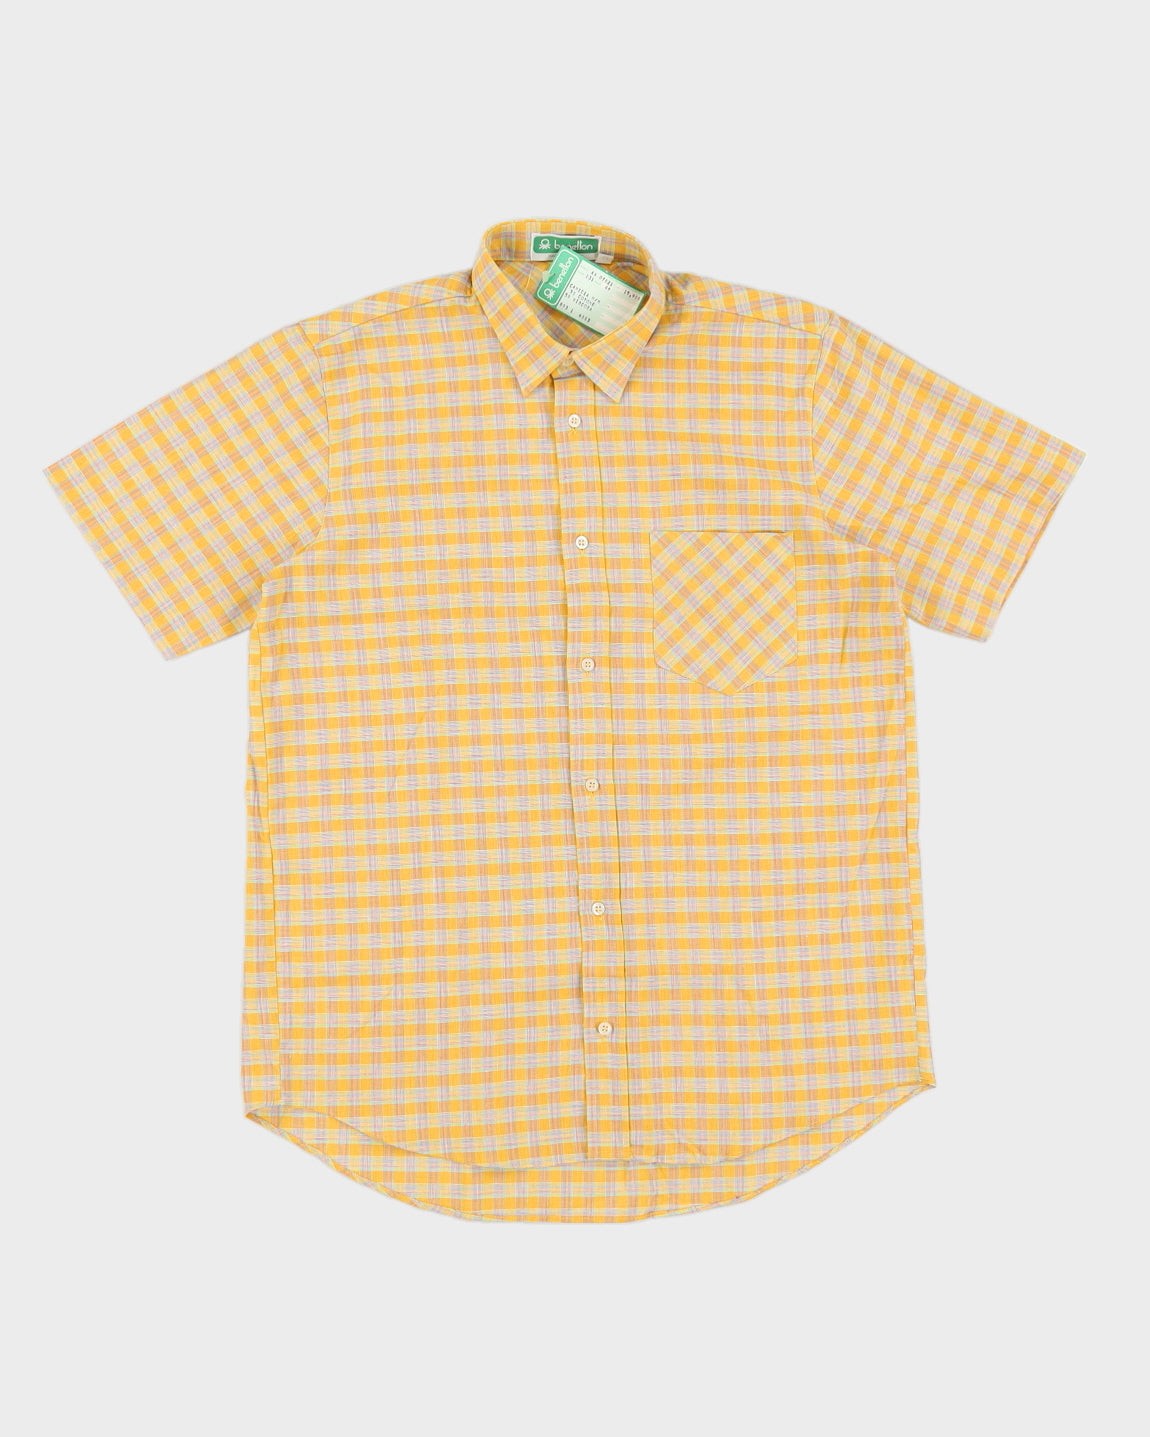 Vintage 70s Benetton Yellow Checked Short Sleeved Shirt Deadstock With Tags - M